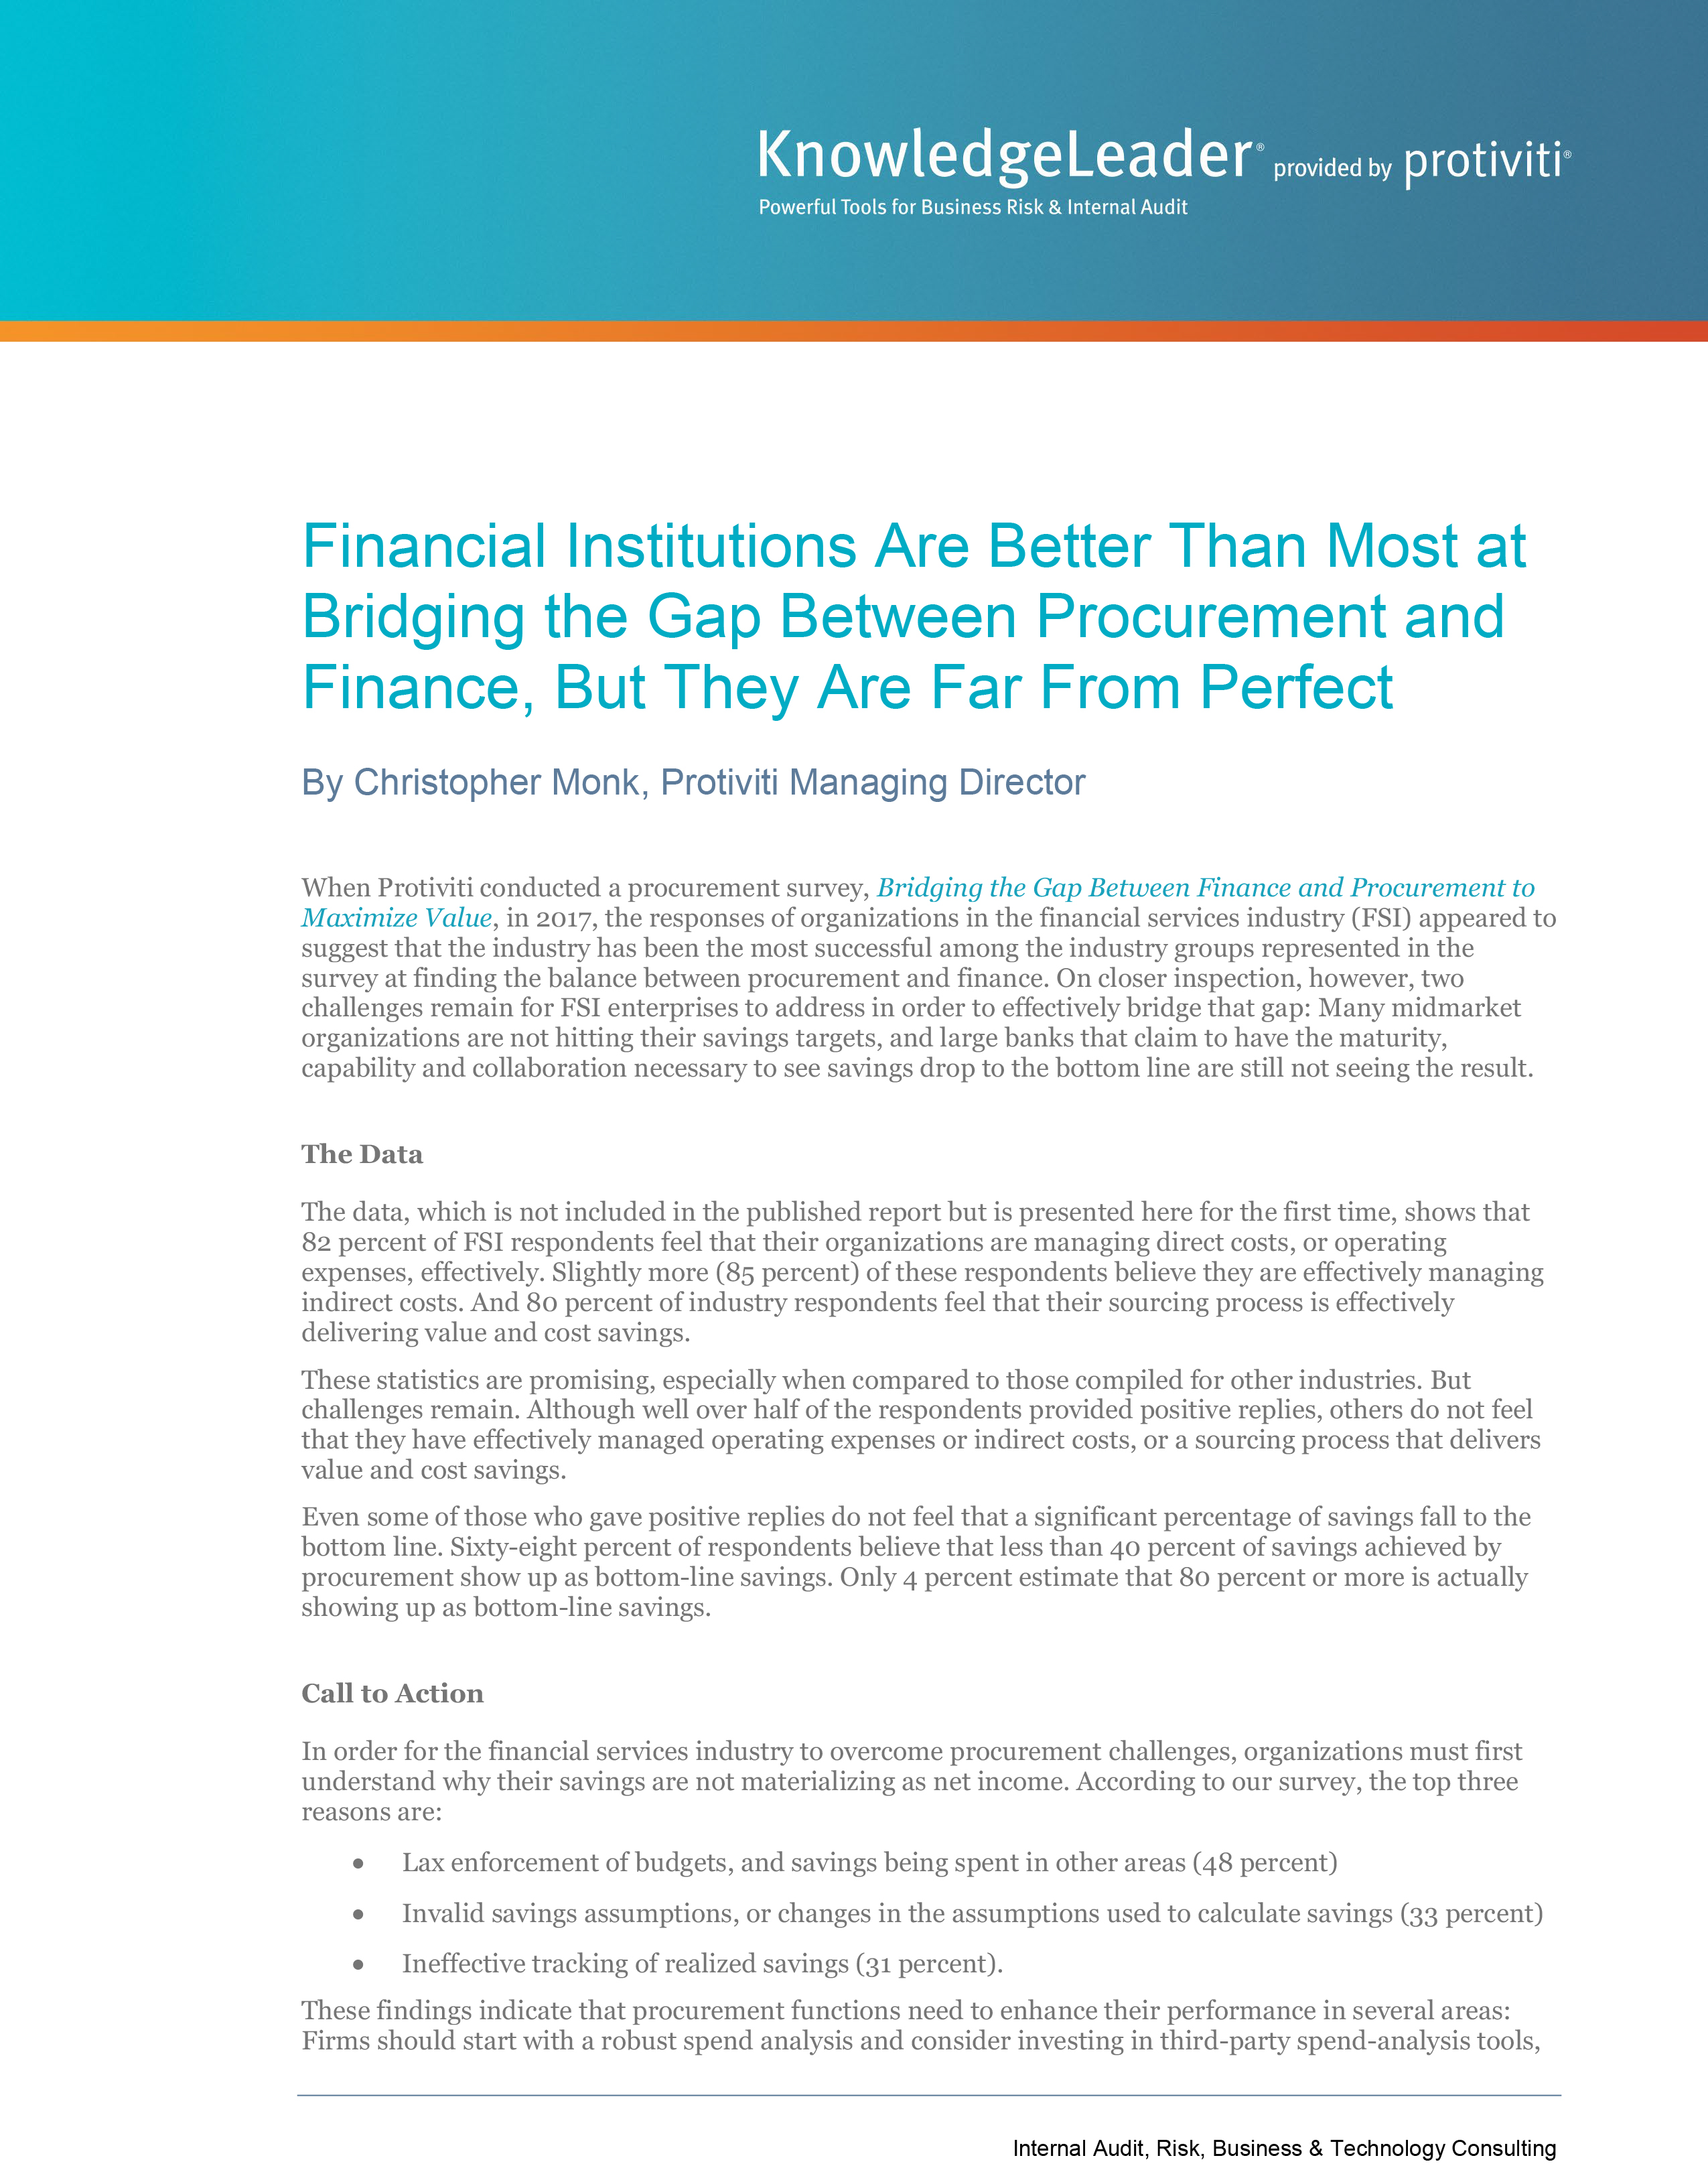 Screenshot of the first page of Financial Institutions Are Better Than Most at Bridging the Gap Between Procurement and Finance, But They Are Far From Perfect